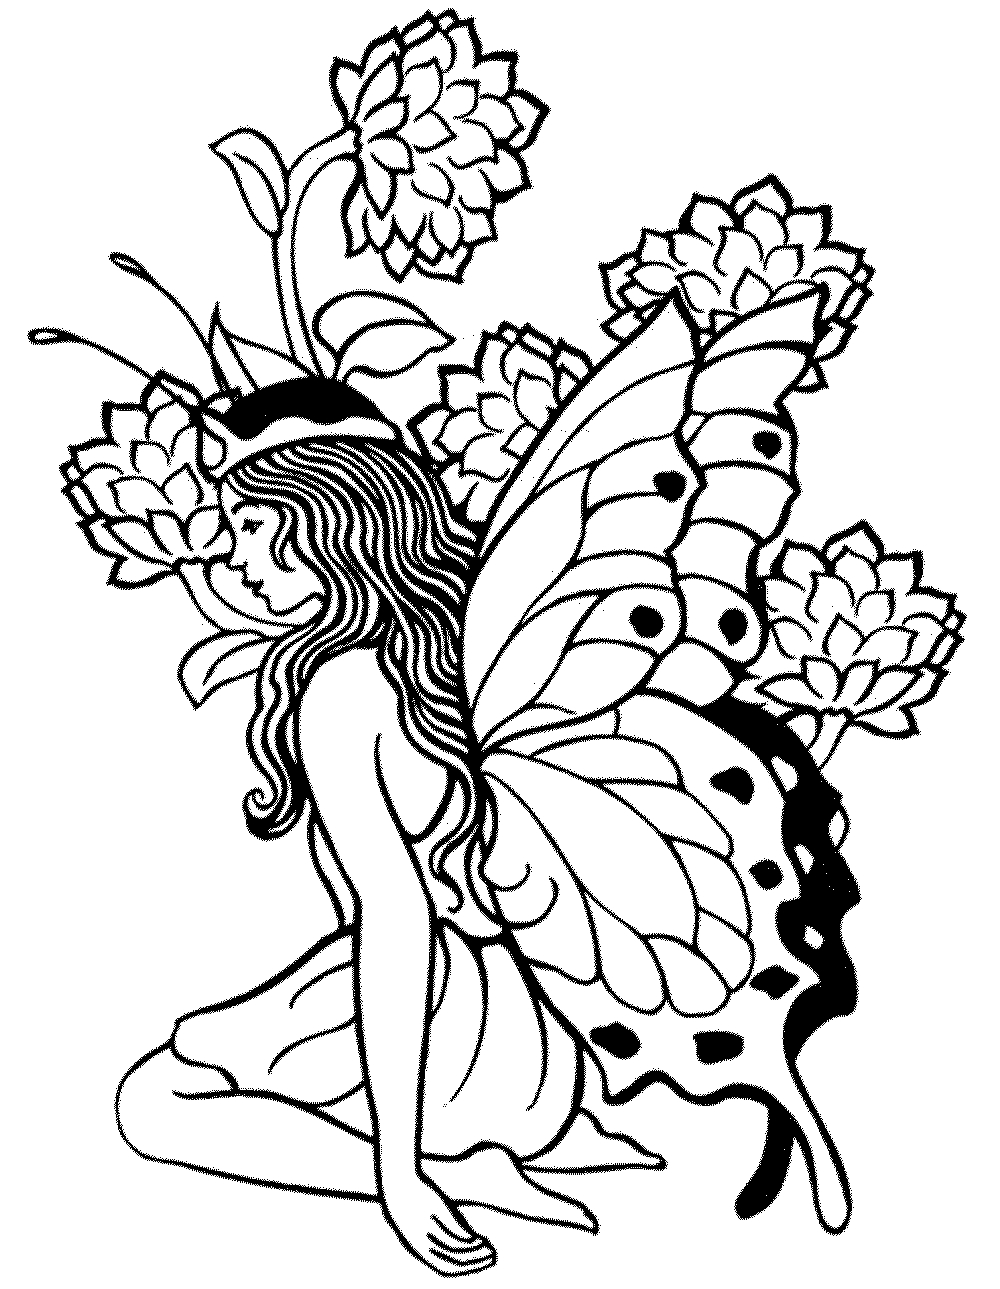 Printable Adult Coloring Pages Fairy - Coloring Home - Free Printable Coloring Pages For Adults Dark Fairies